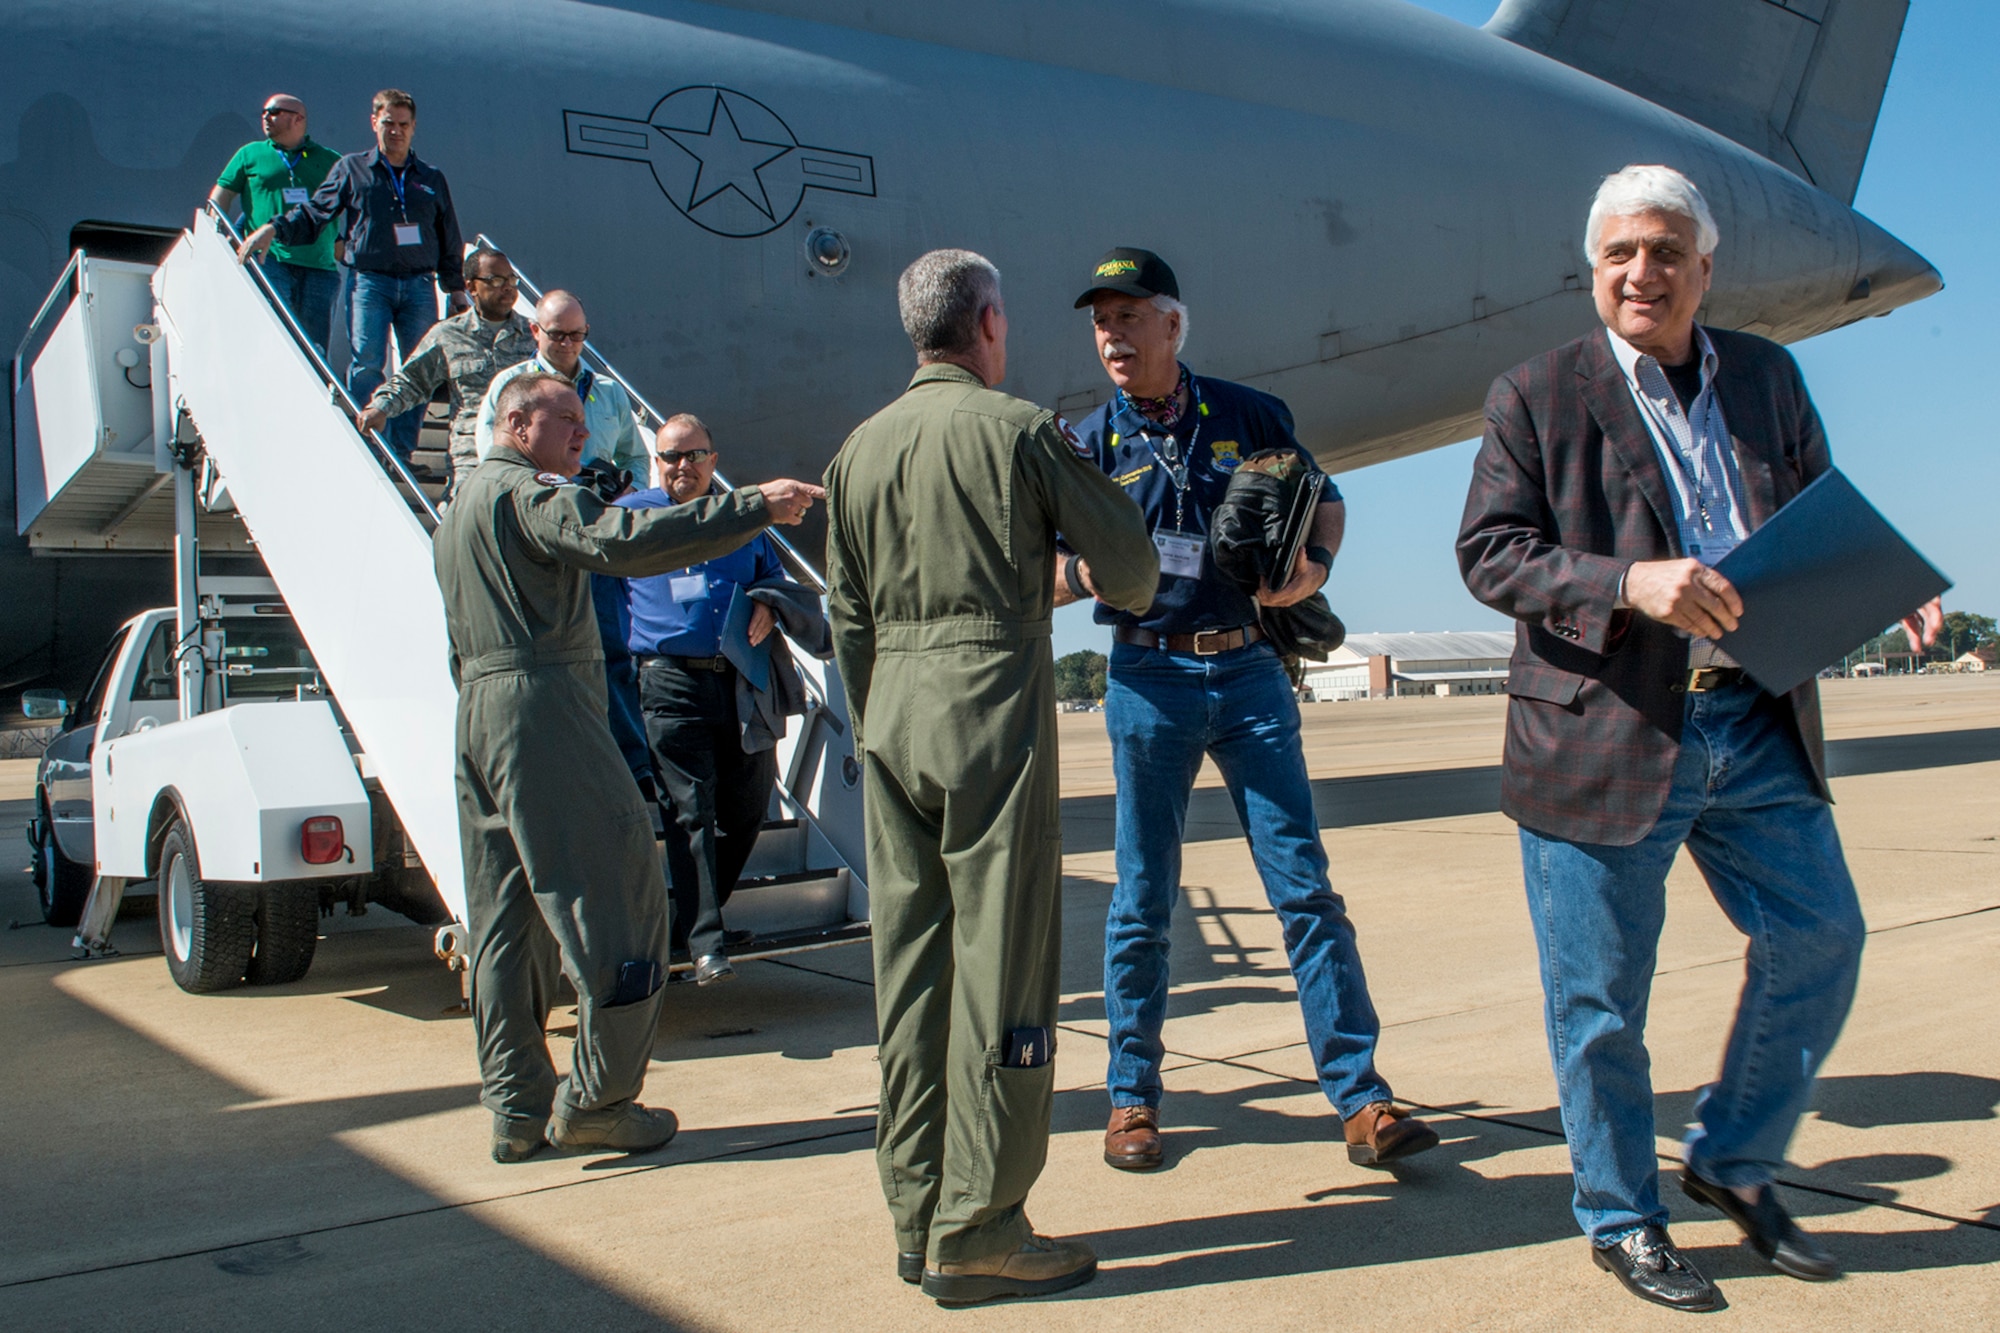 U.S. Air Force Col. Bruce Cox, 307th Bomb Wing commander, and Col. Trey Morriss, 307th Bomb Wing vice commander, greet civic leaders from the San Antonio, Texas, area during a visit to Barksdale Air Force Base, La., Oct. 27, 2016. The tour was hosted by the 433rd Airlift Wing from Lackland Air Force Base, Texas, and travel to Barksdale to get first hand look at the different missions throughout the Air Force Reserve Command. (U.S. Air Force photo by Master Sgt. Greg Steele/Released)